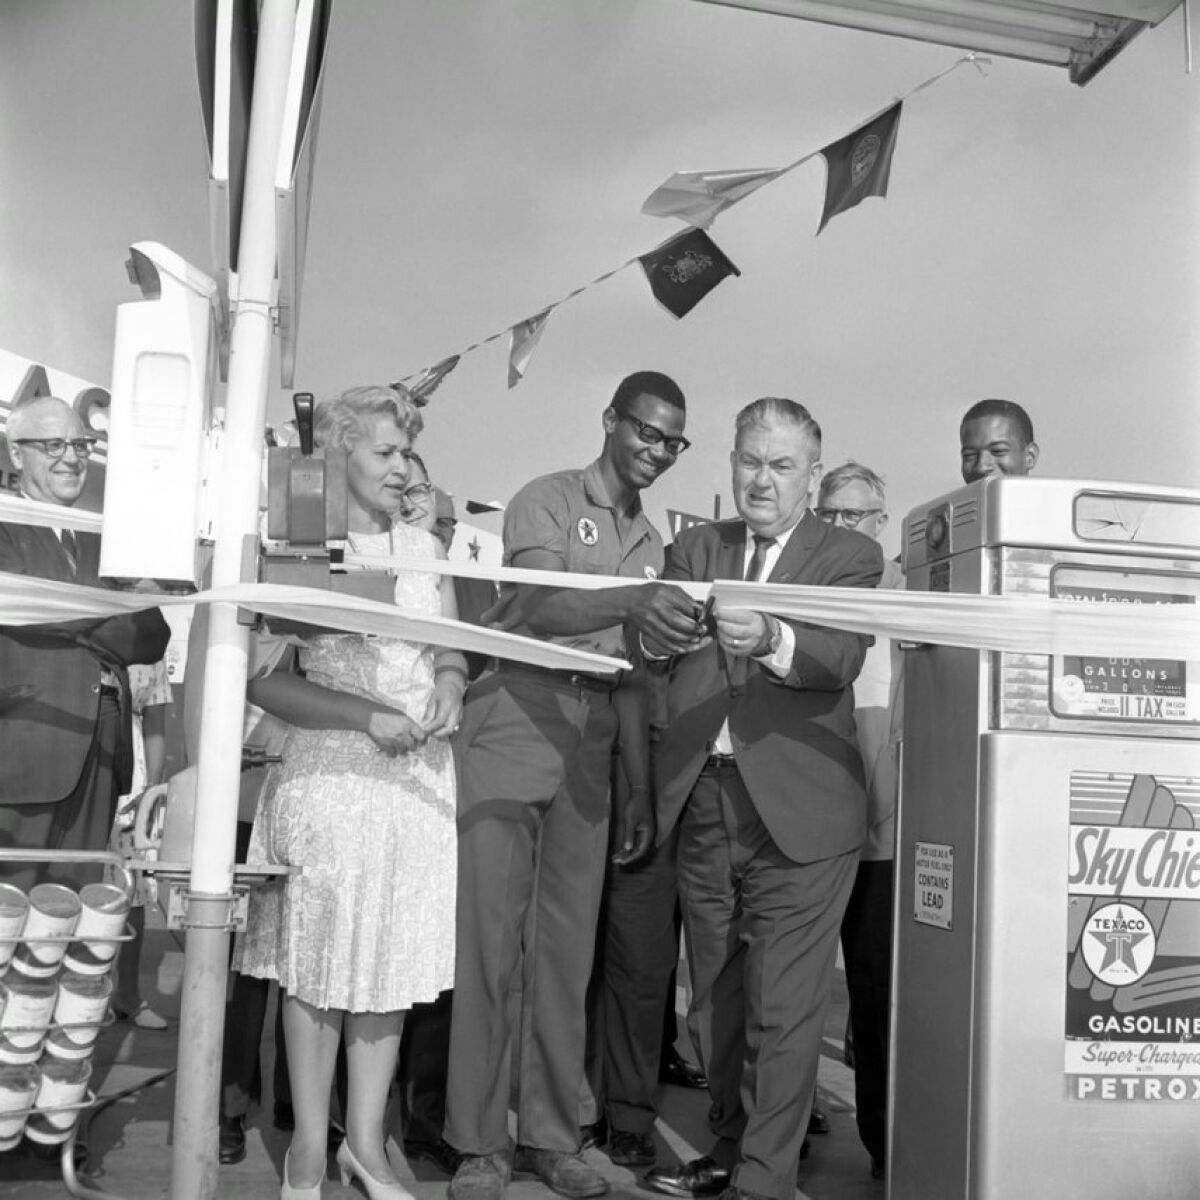 The Urban League gas station opening in August 1966.